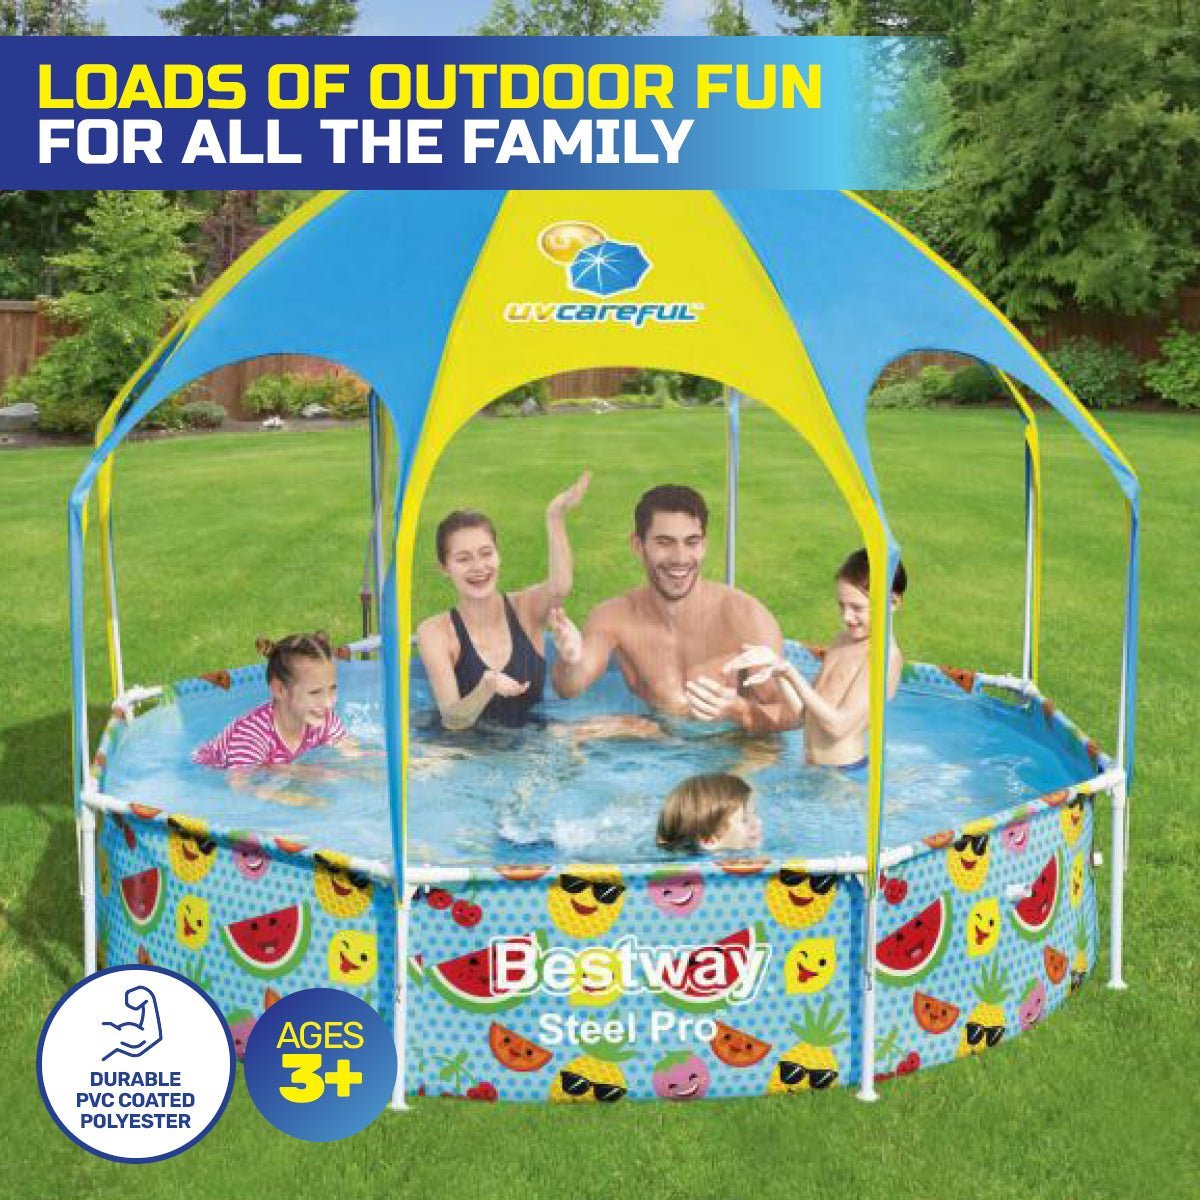 Bestway 2.38 x 1.5m Kids Above Ground Pool & UV Protected Canopy 1688 Litre - Little Kids Business